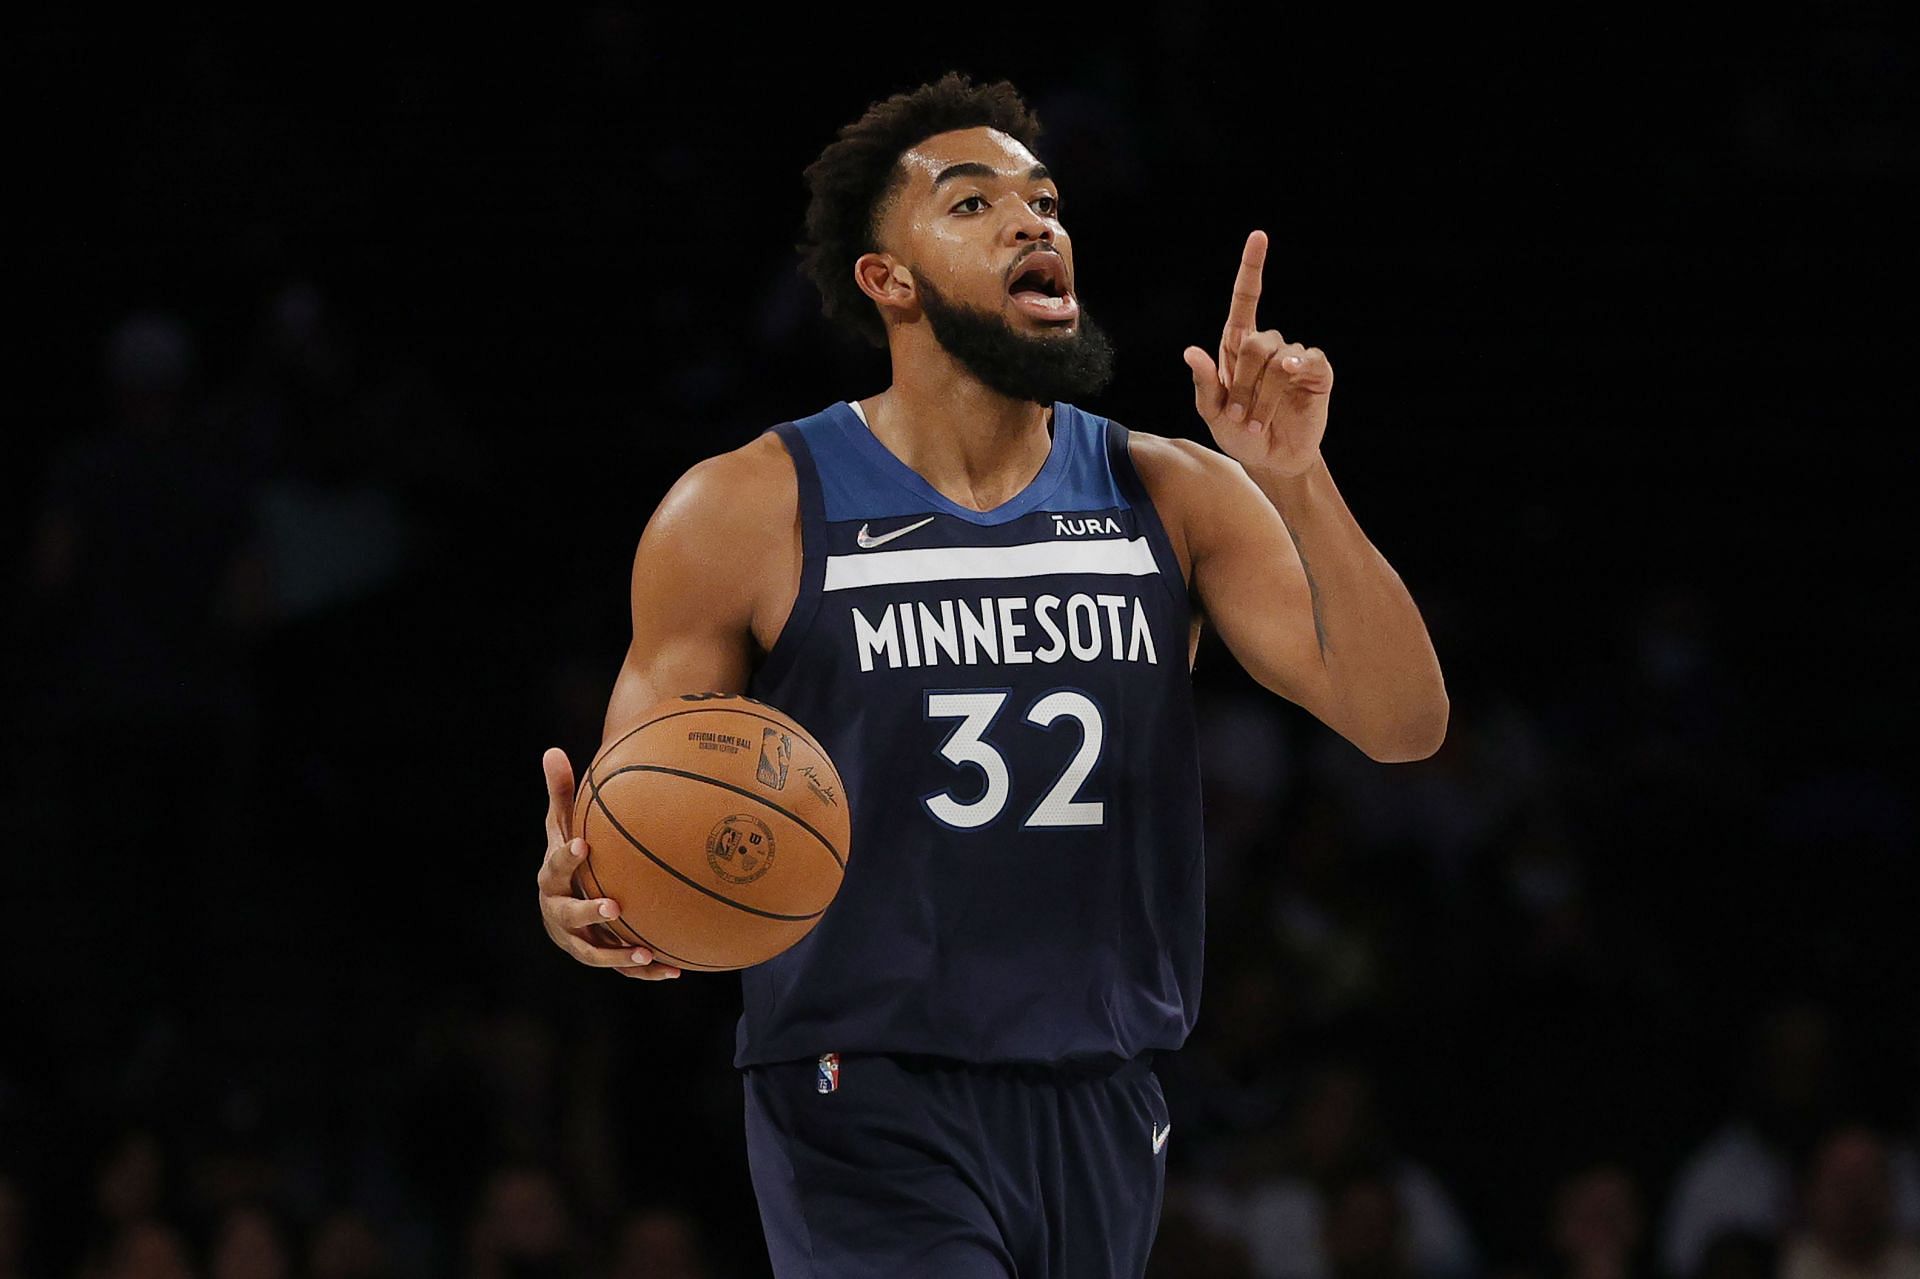 Karl-Anthony Towns sometimes runs the play for the Minnesota Timberwolves.